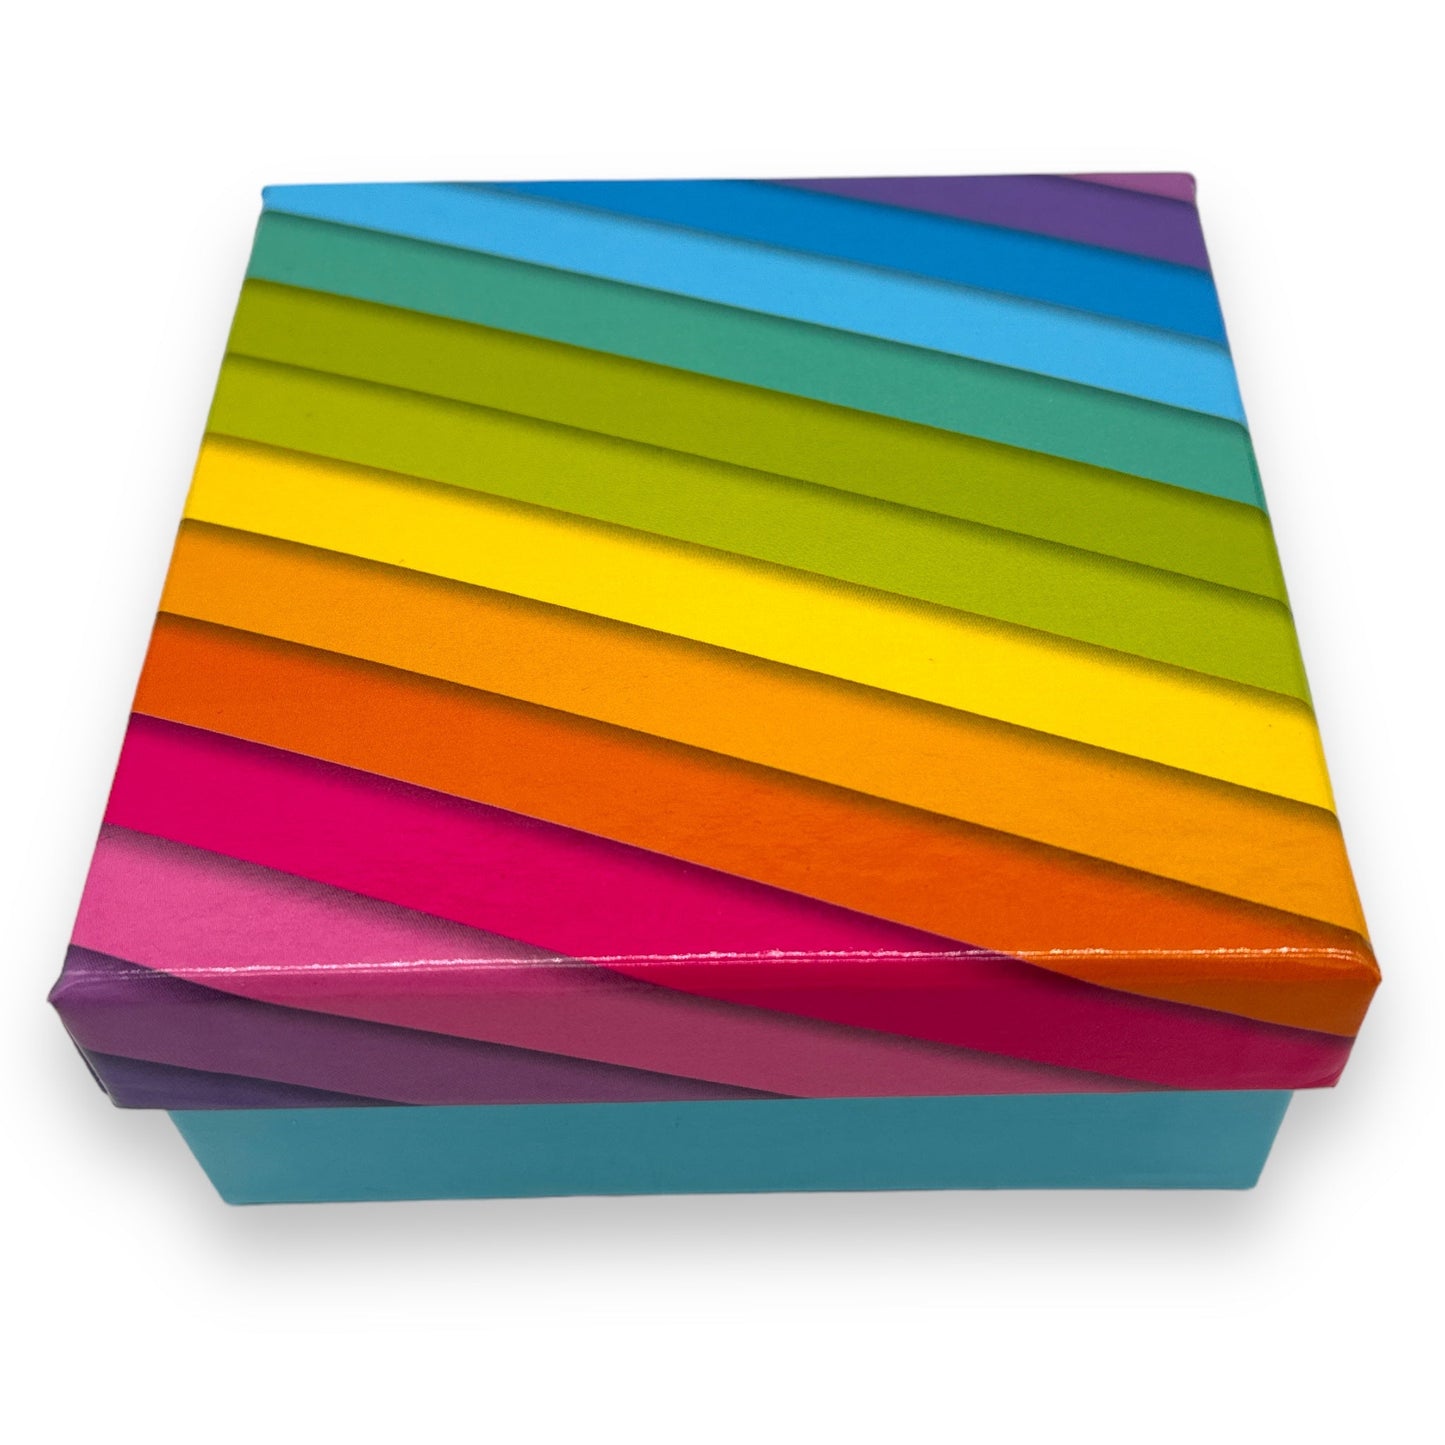 Rainbow Cardboard Box - 12x5.2 cm - Add Color and Style to Your Storage Space